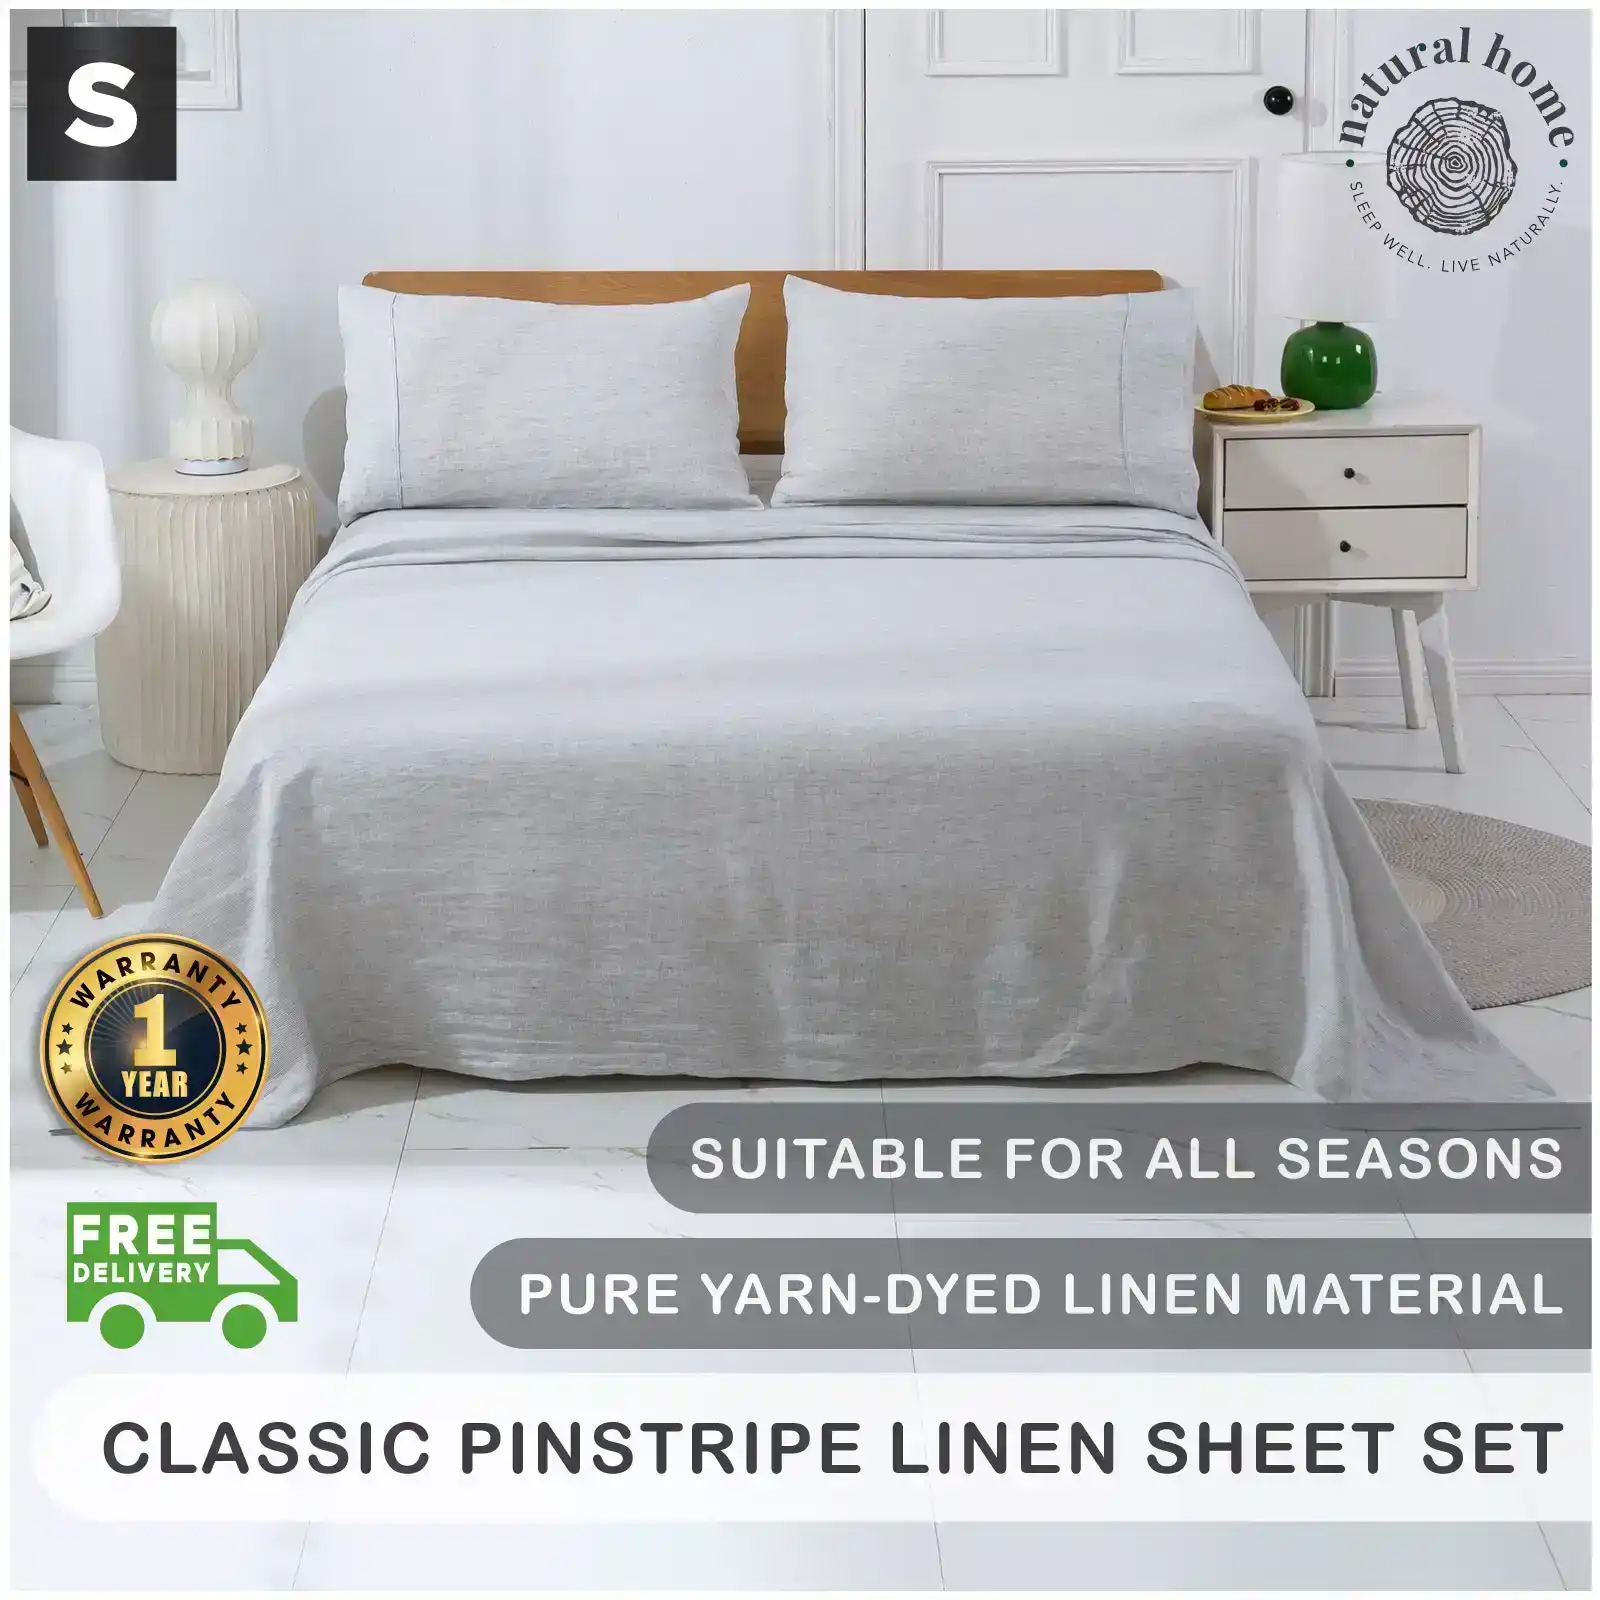 Natural Home Classic Pinstripe Linen Sheet Set White with Dark Pinstripe Single Bed